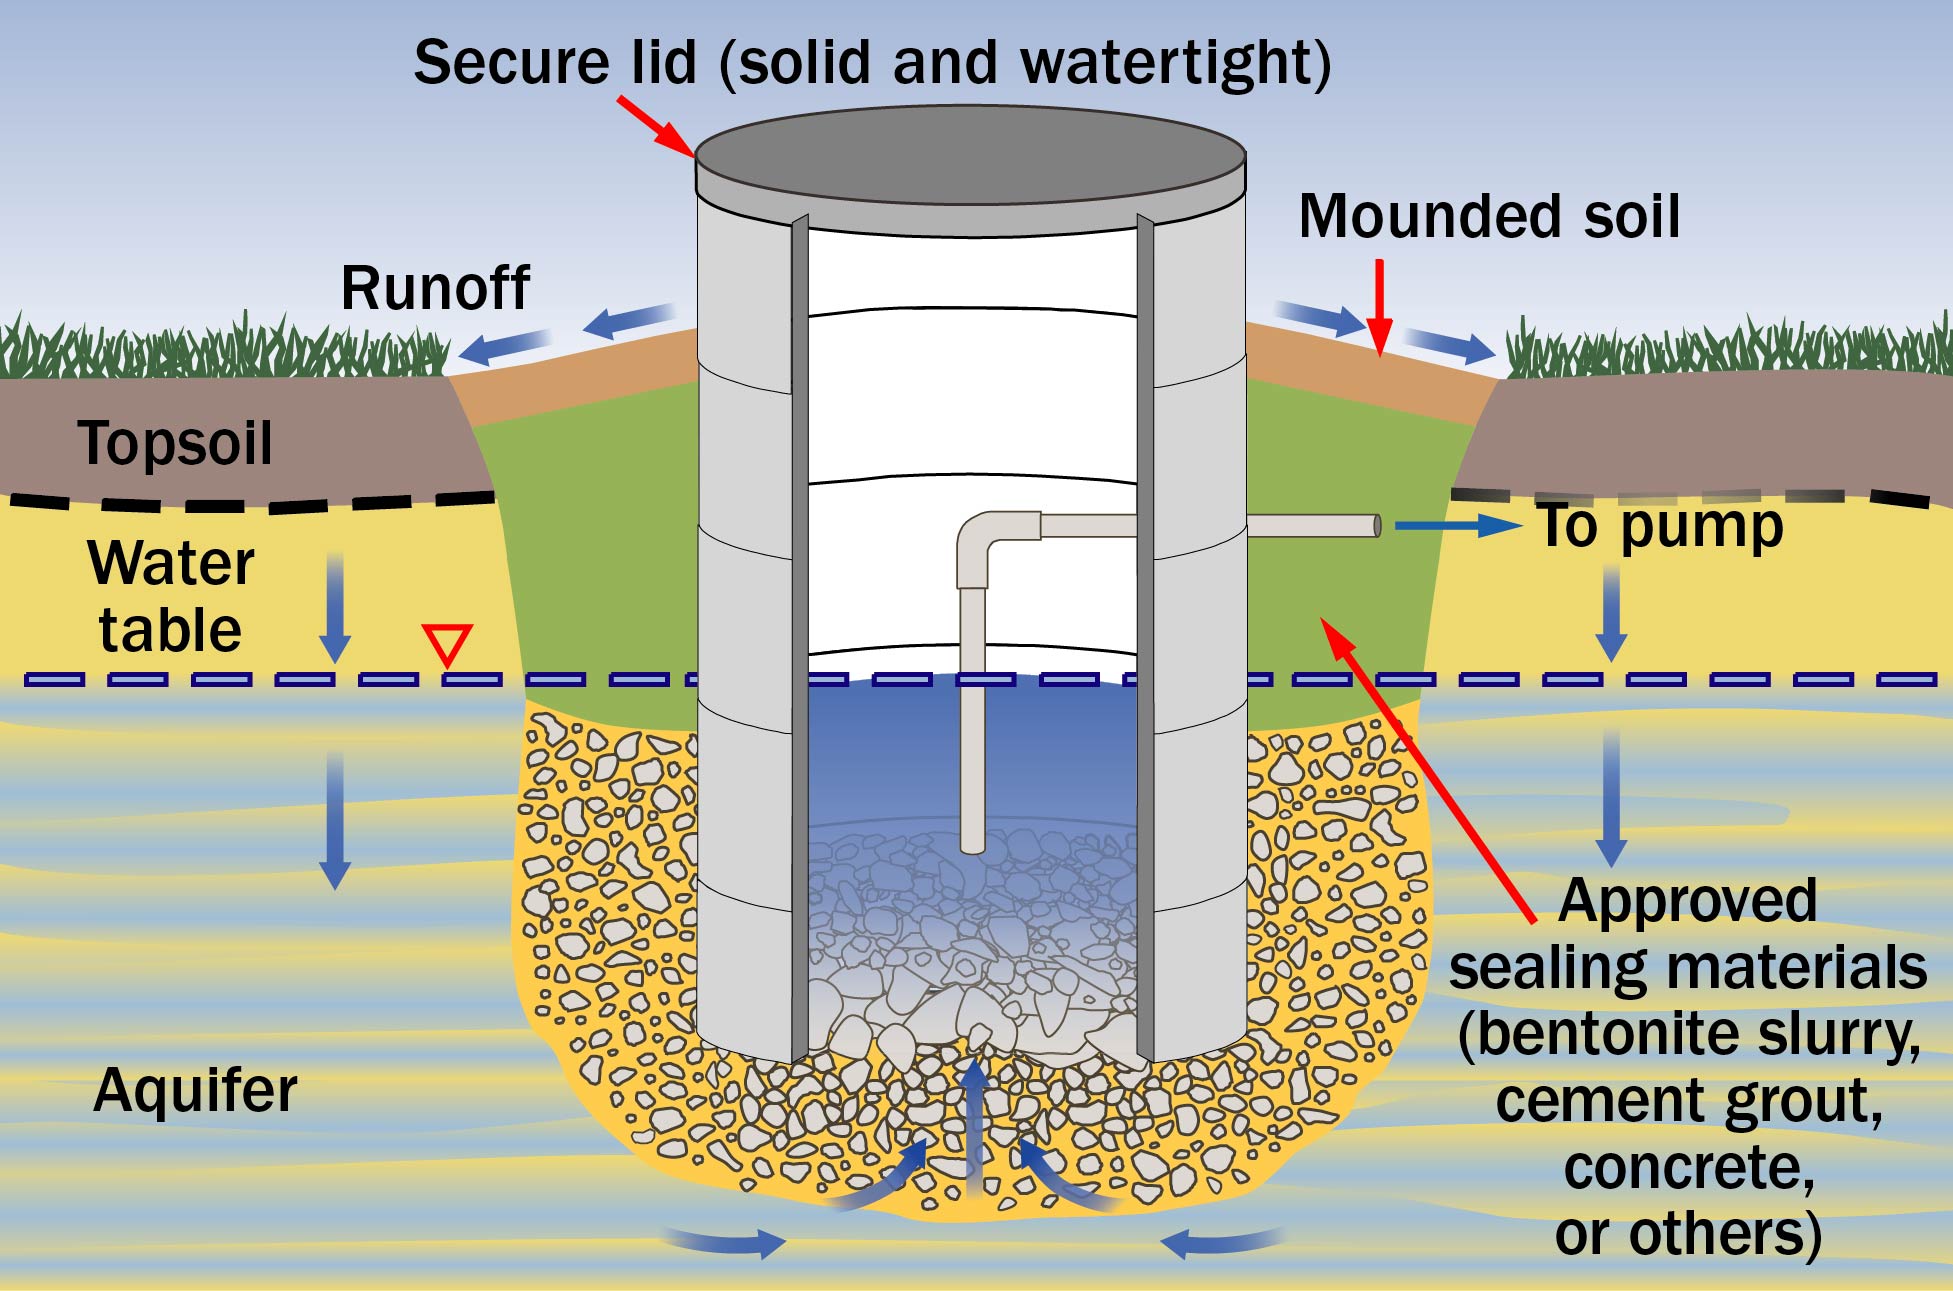 A properly constructed dug or bored well that keeps surface water and contaminants from directly entering the well